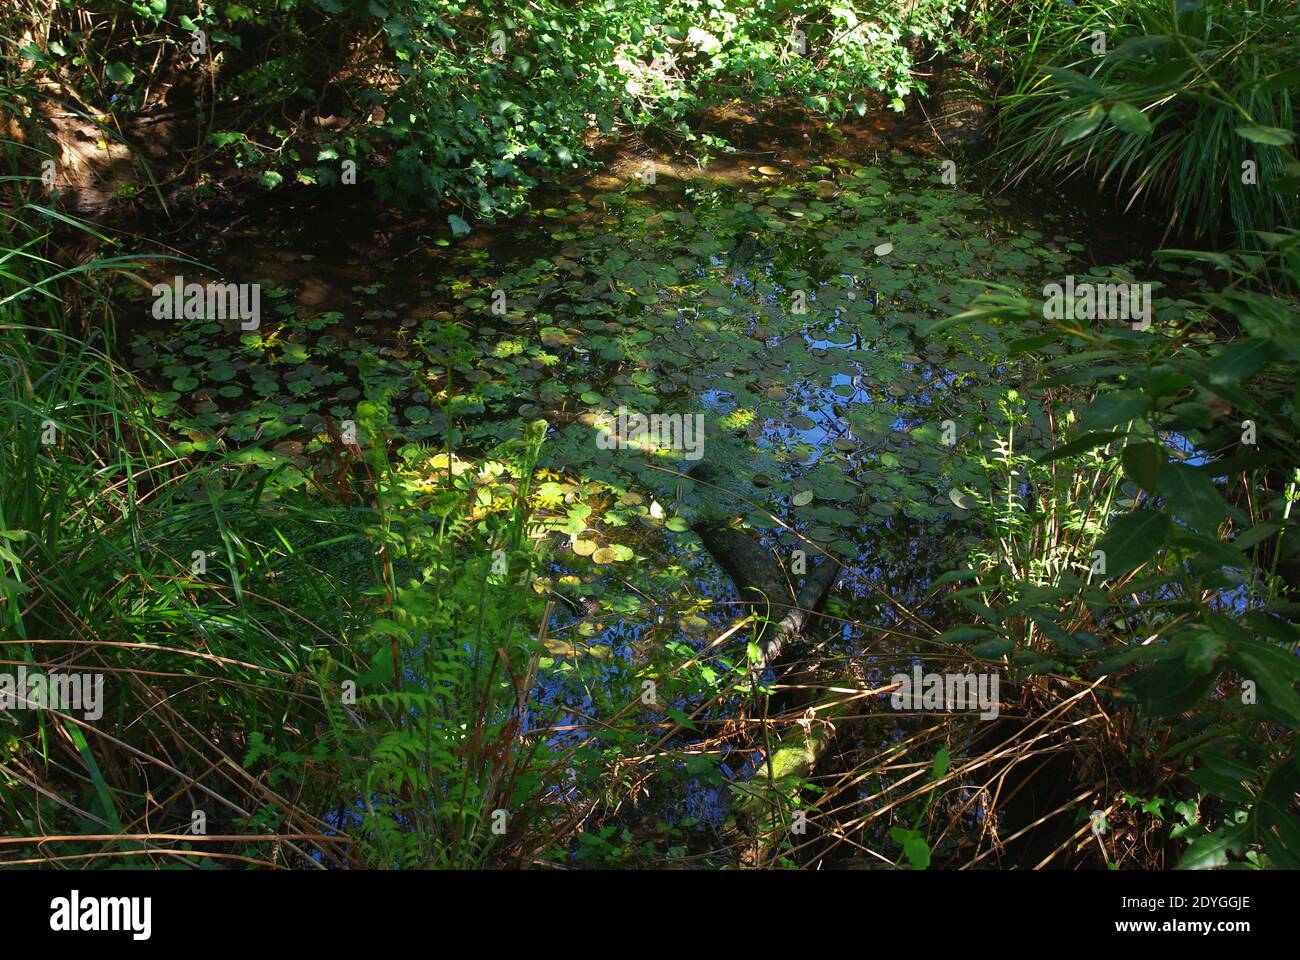 Natural pond with water lilies (Nymphaea sp.) Stock Photo